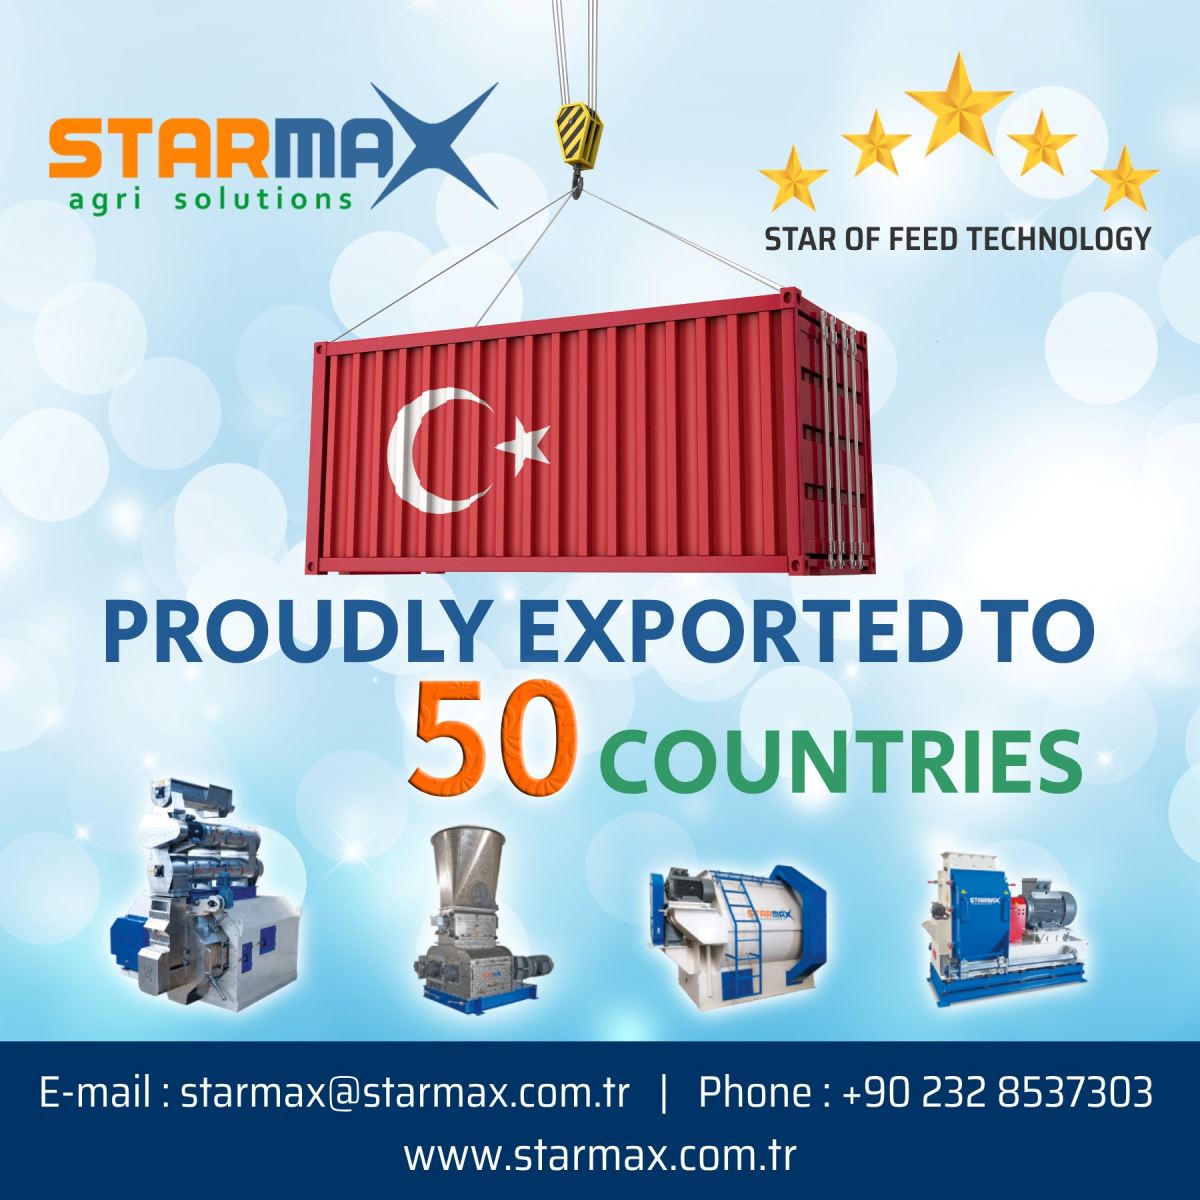 Proudly exported to 50 countries